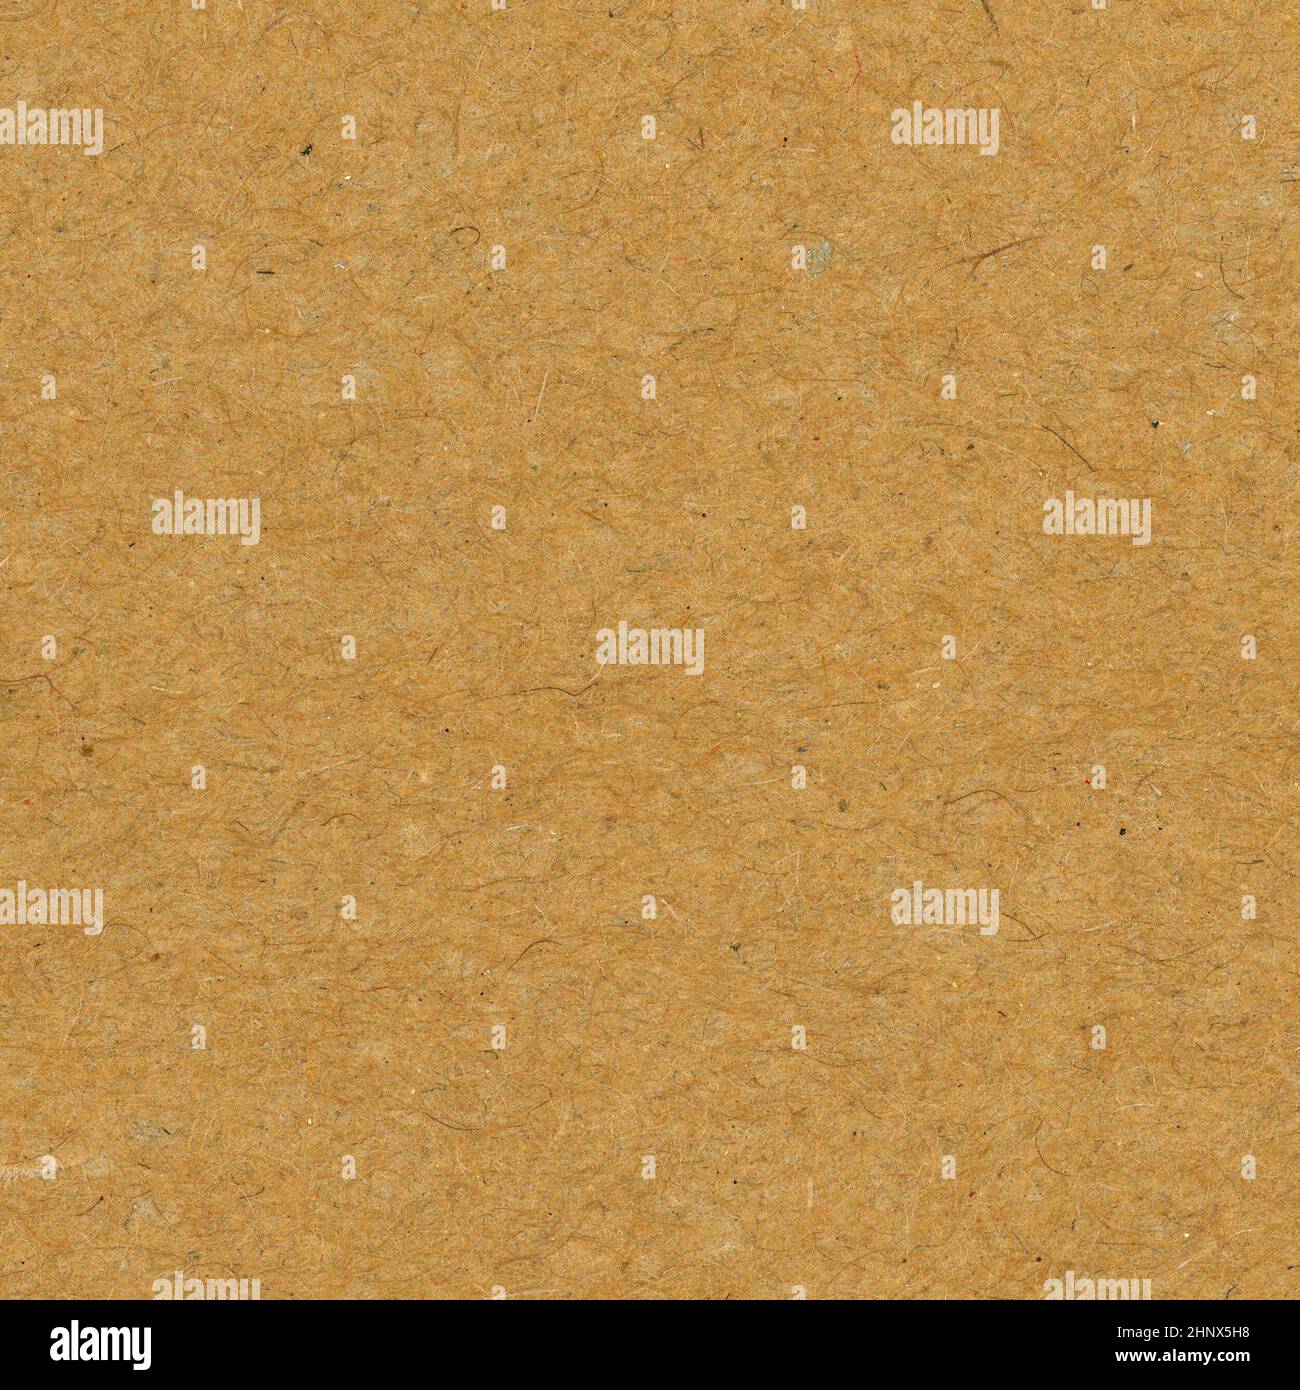 brown cardboard texture useful as a background Stock Photo